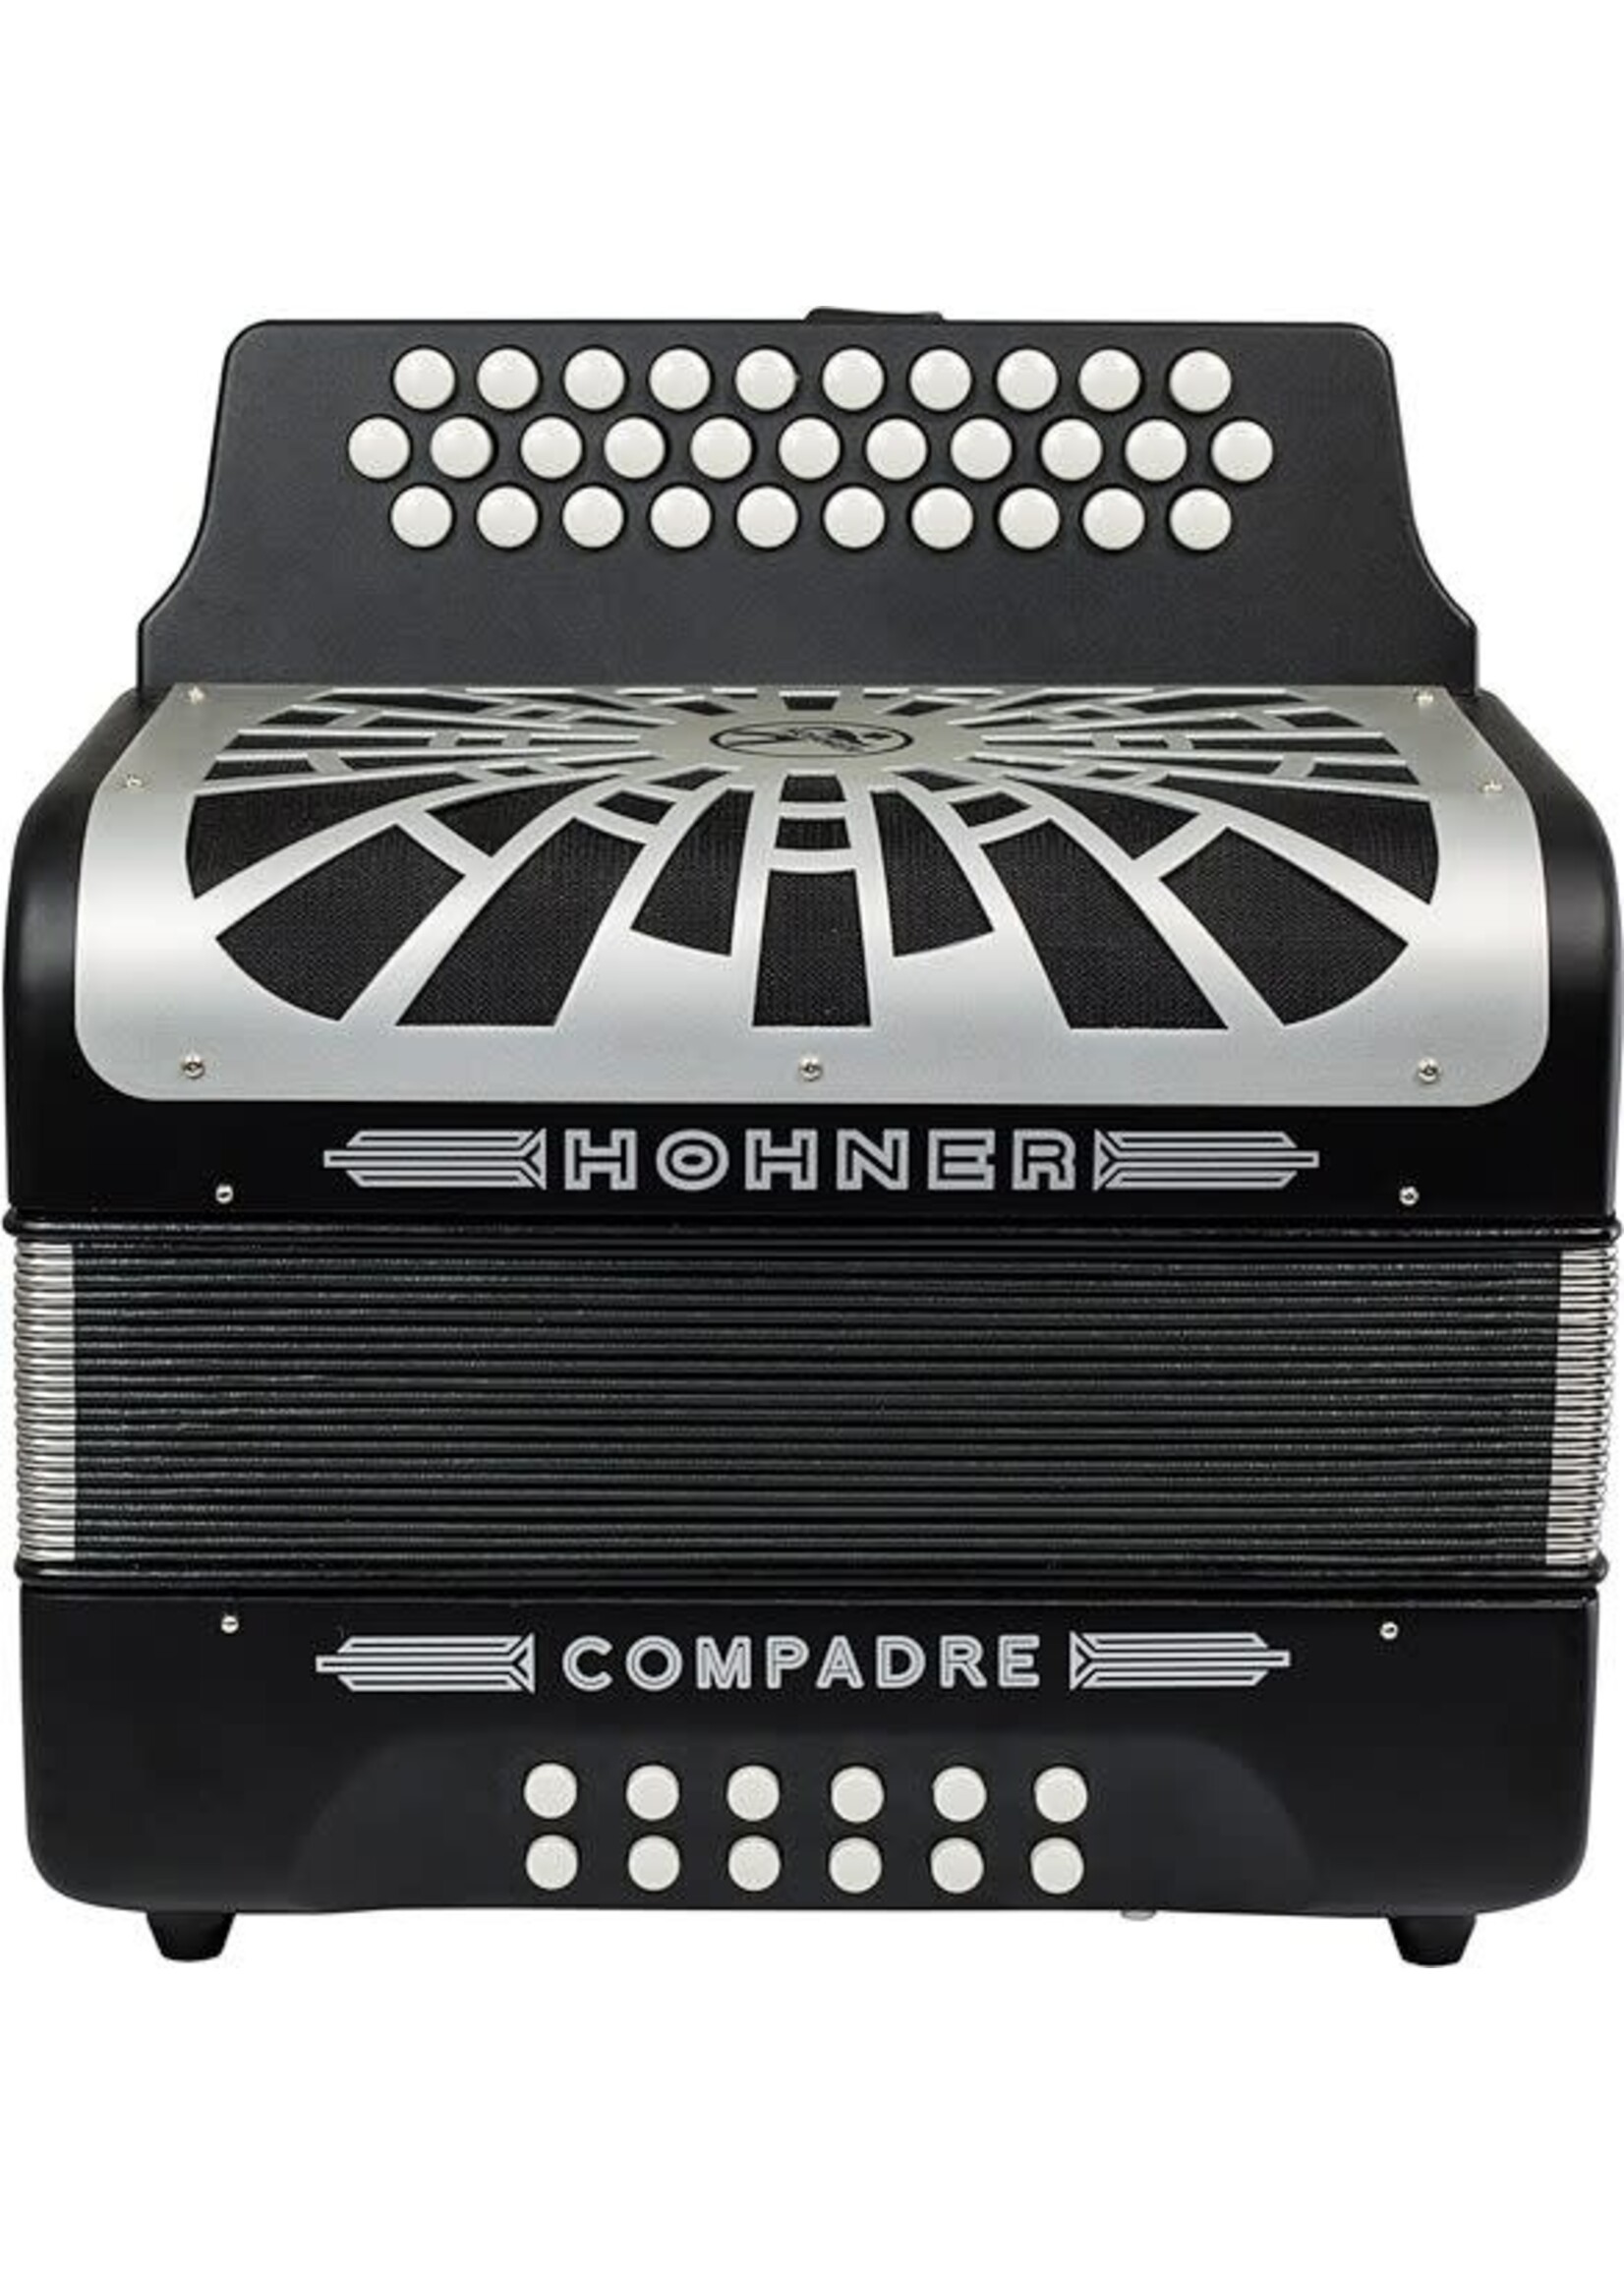 Hohner Hohner COFB-N Compadre FBbEb Accordion, Black w/ Silver Grille